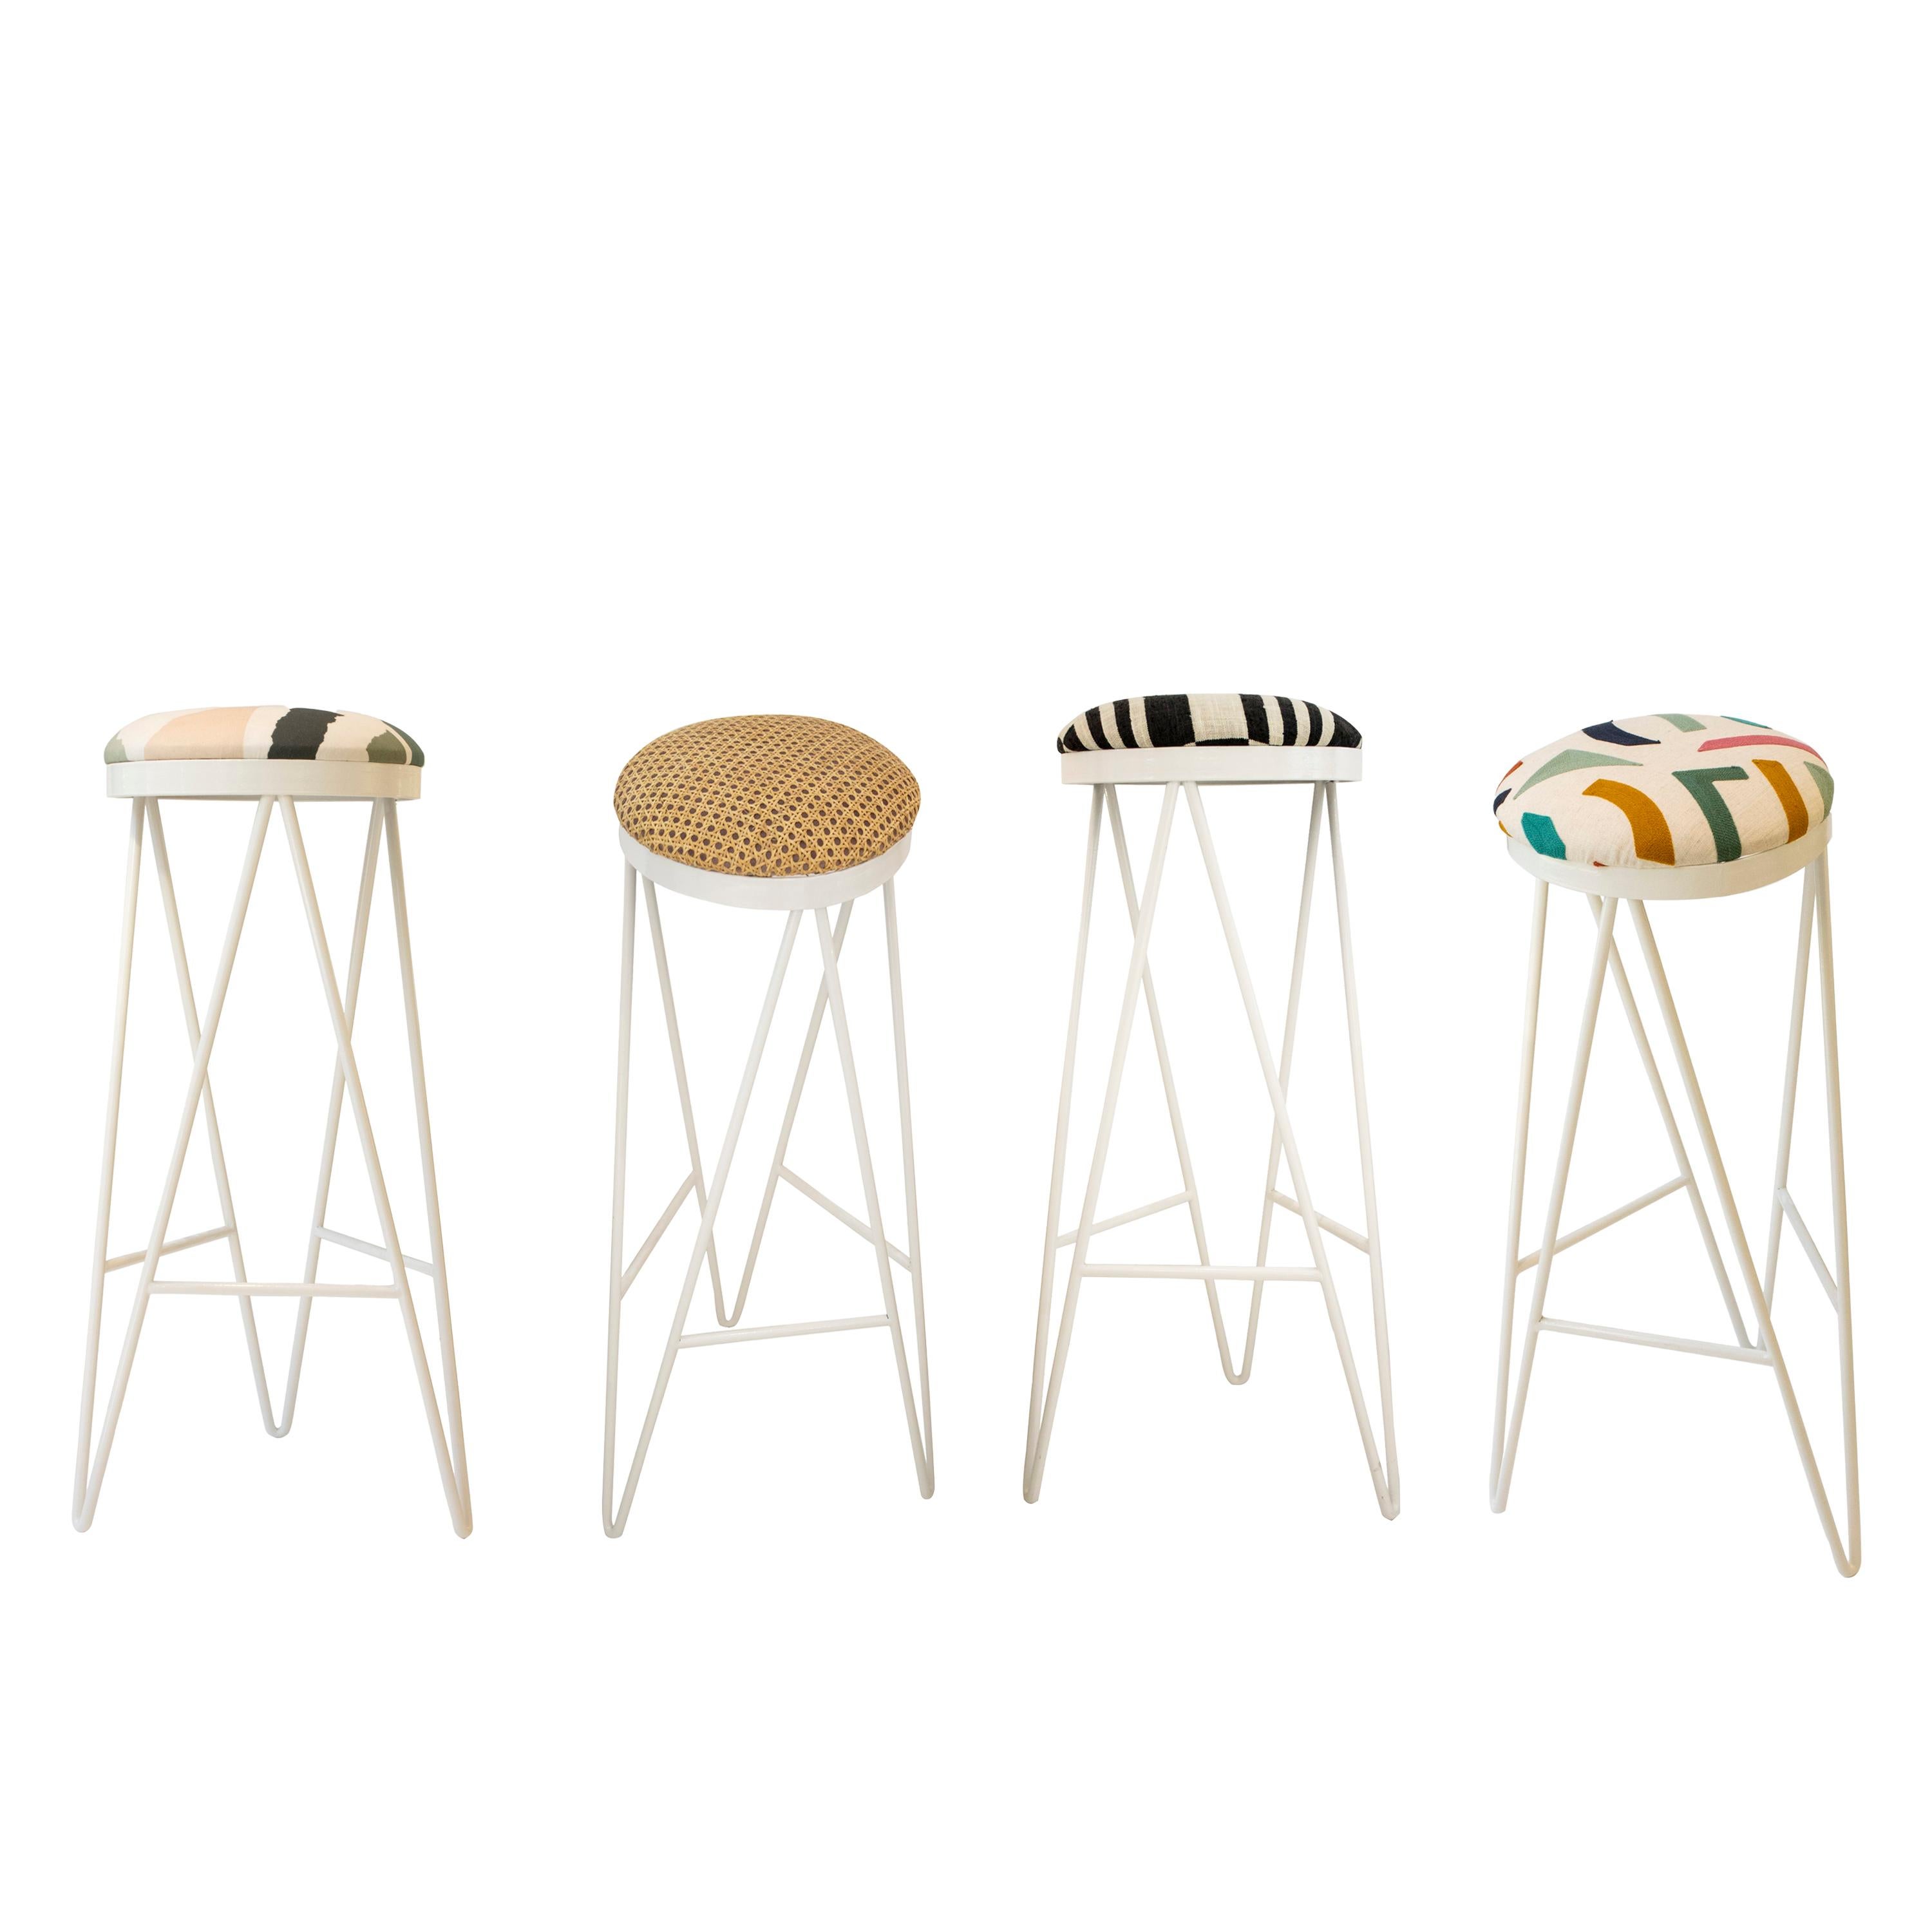 Contemporary Set of 8 Steel Stool Designed by IKB191 Studio , Spain, 2022 For Sale 9